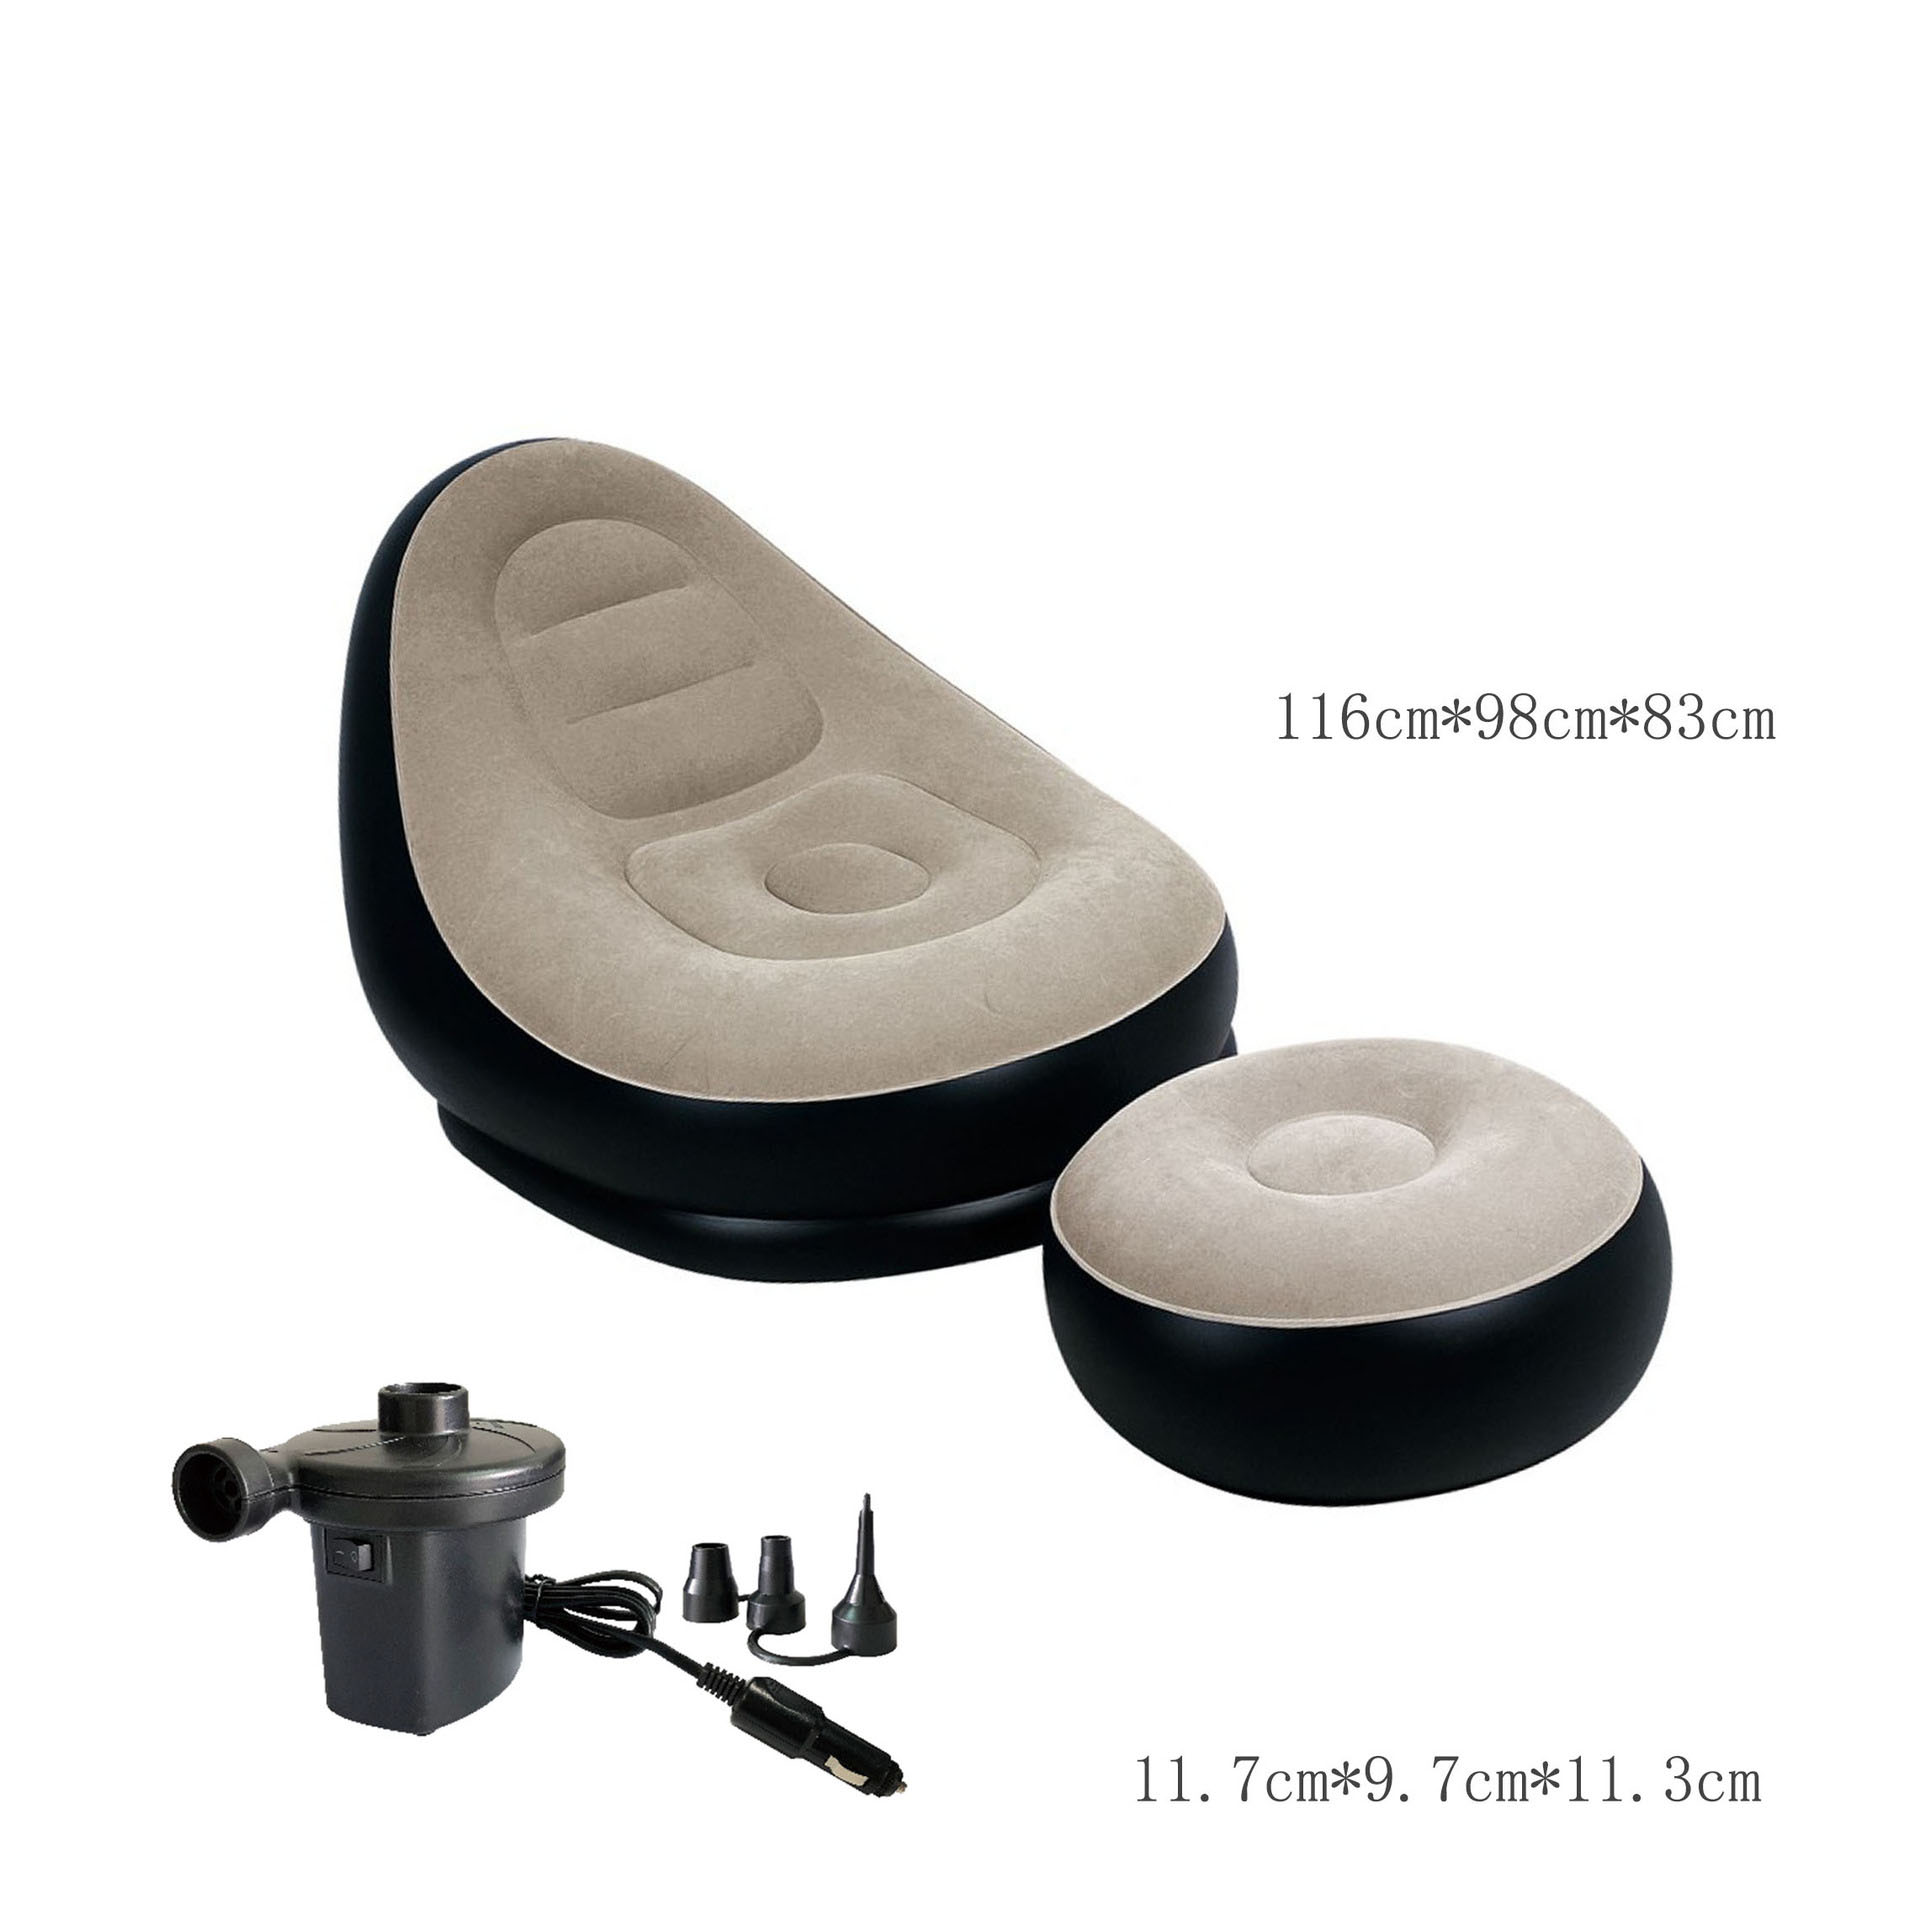 Luxury pedal sofa ( 116 * 98 * 83cm ) 27449 ( with car inflatable pump )